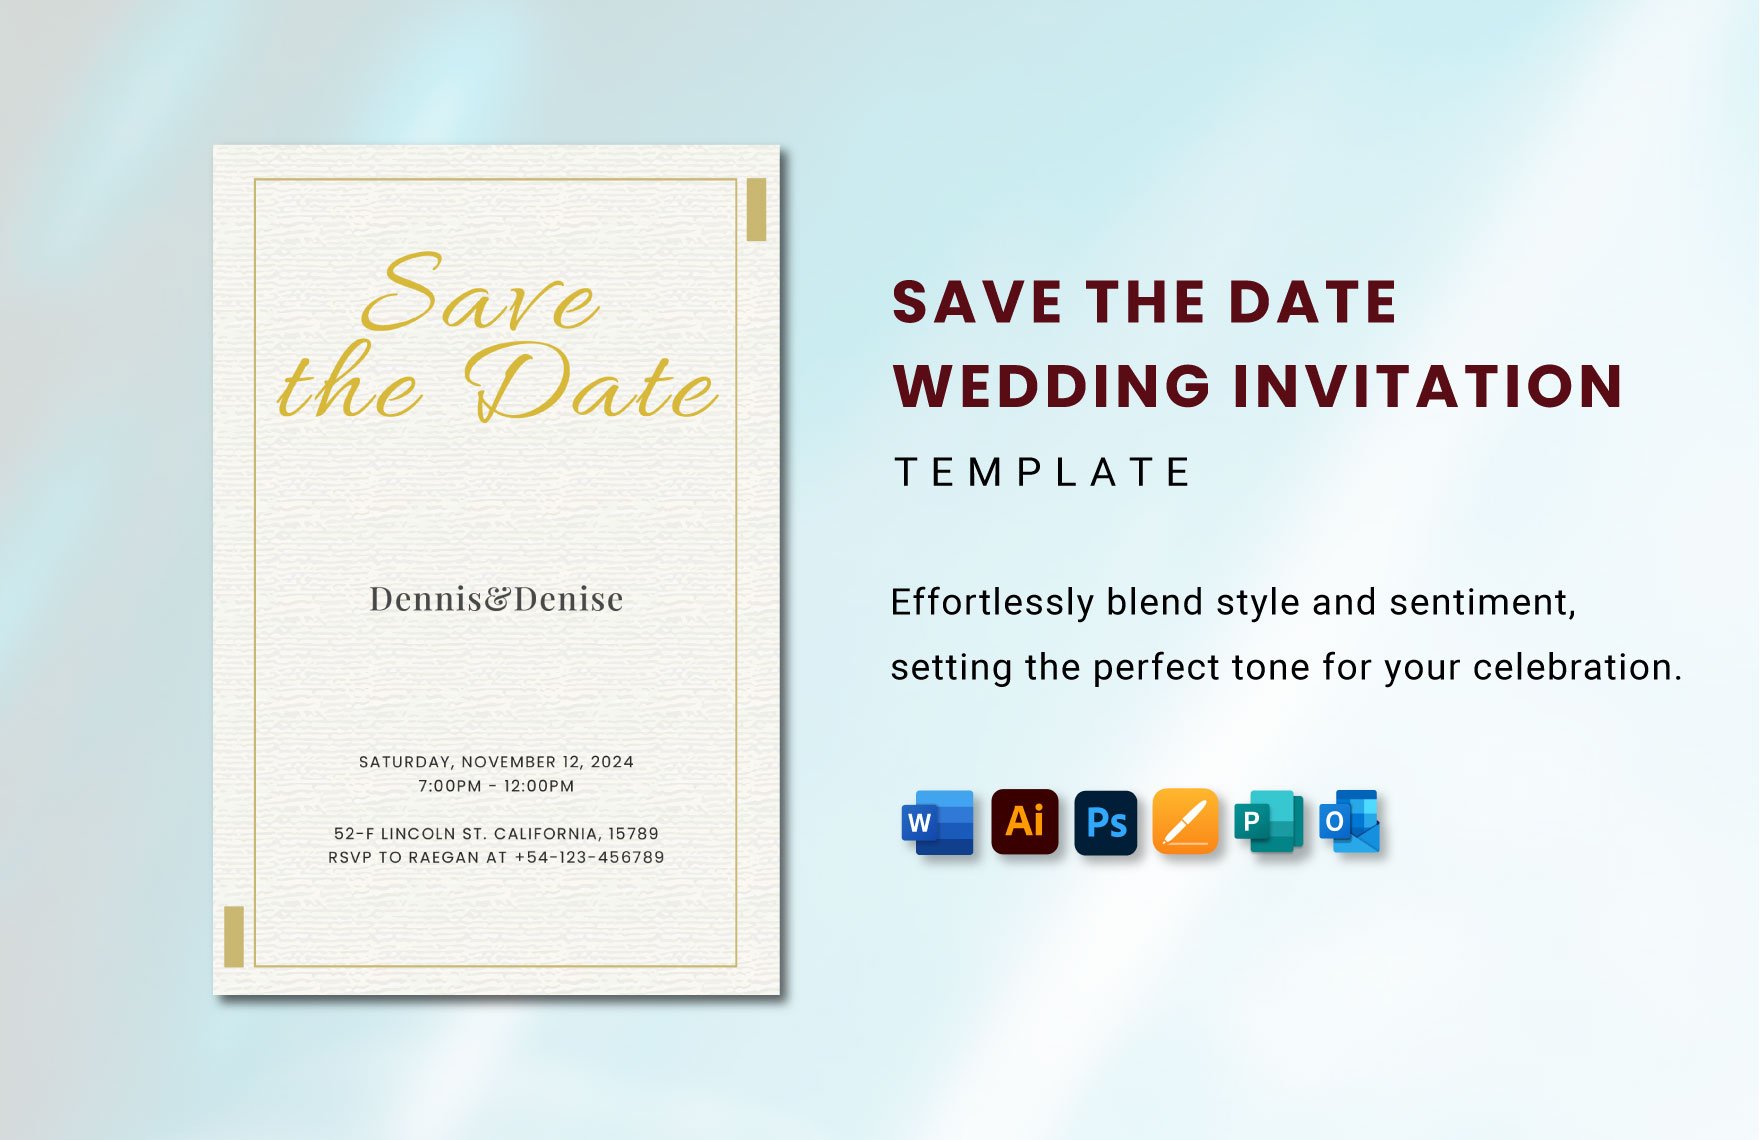 Save The Date Wedding Invitation Template